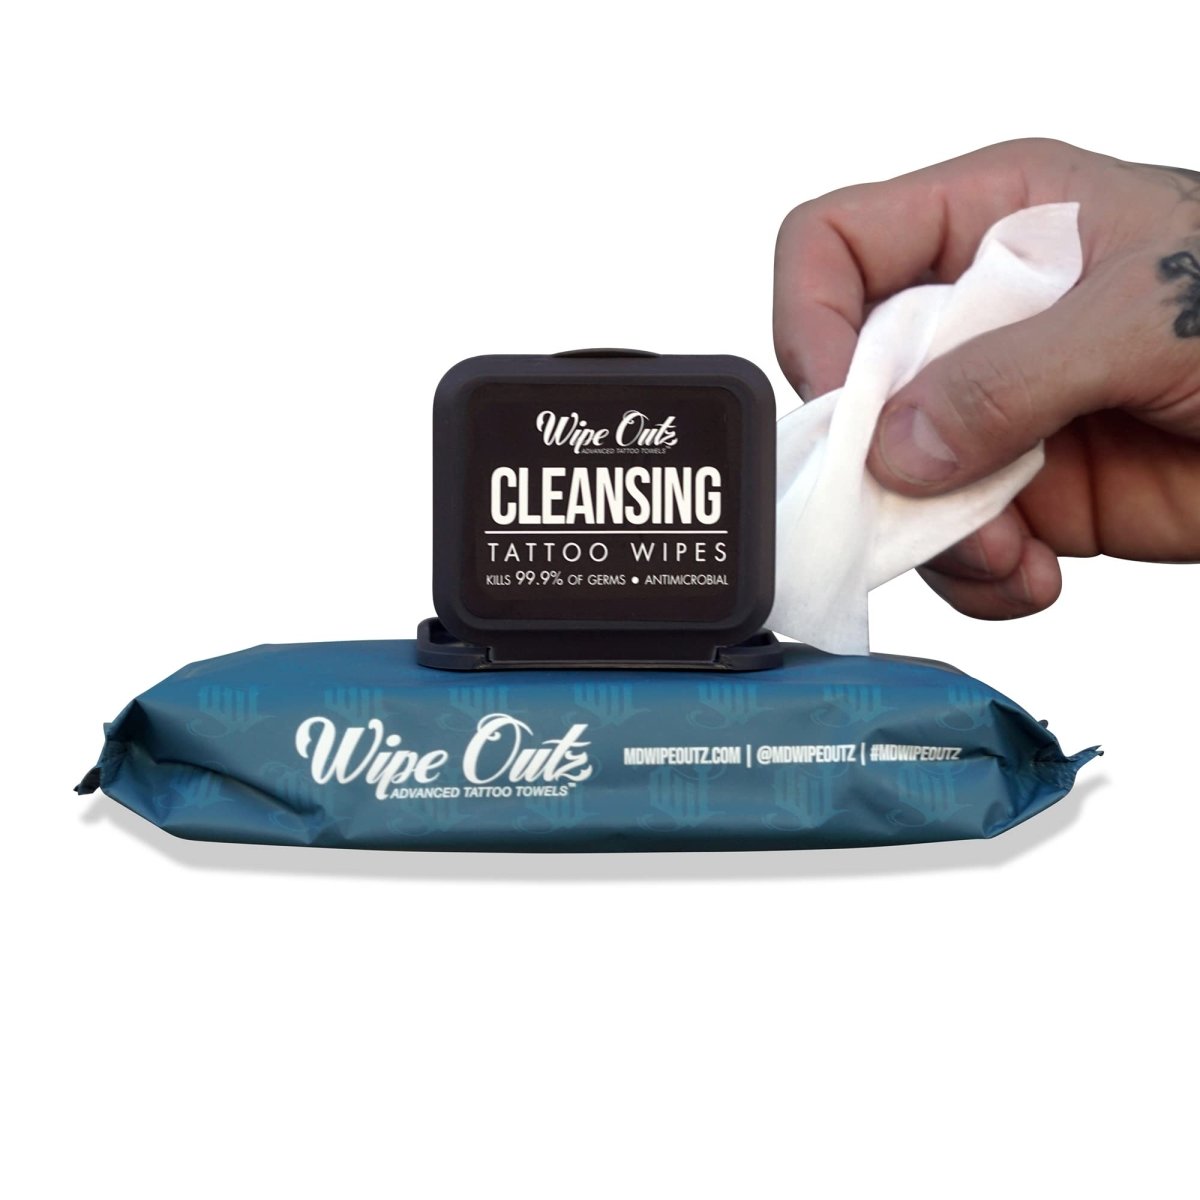 Wipe Outz Tattoo Cleansing Wipes, 40-Count, Alcohol-Free